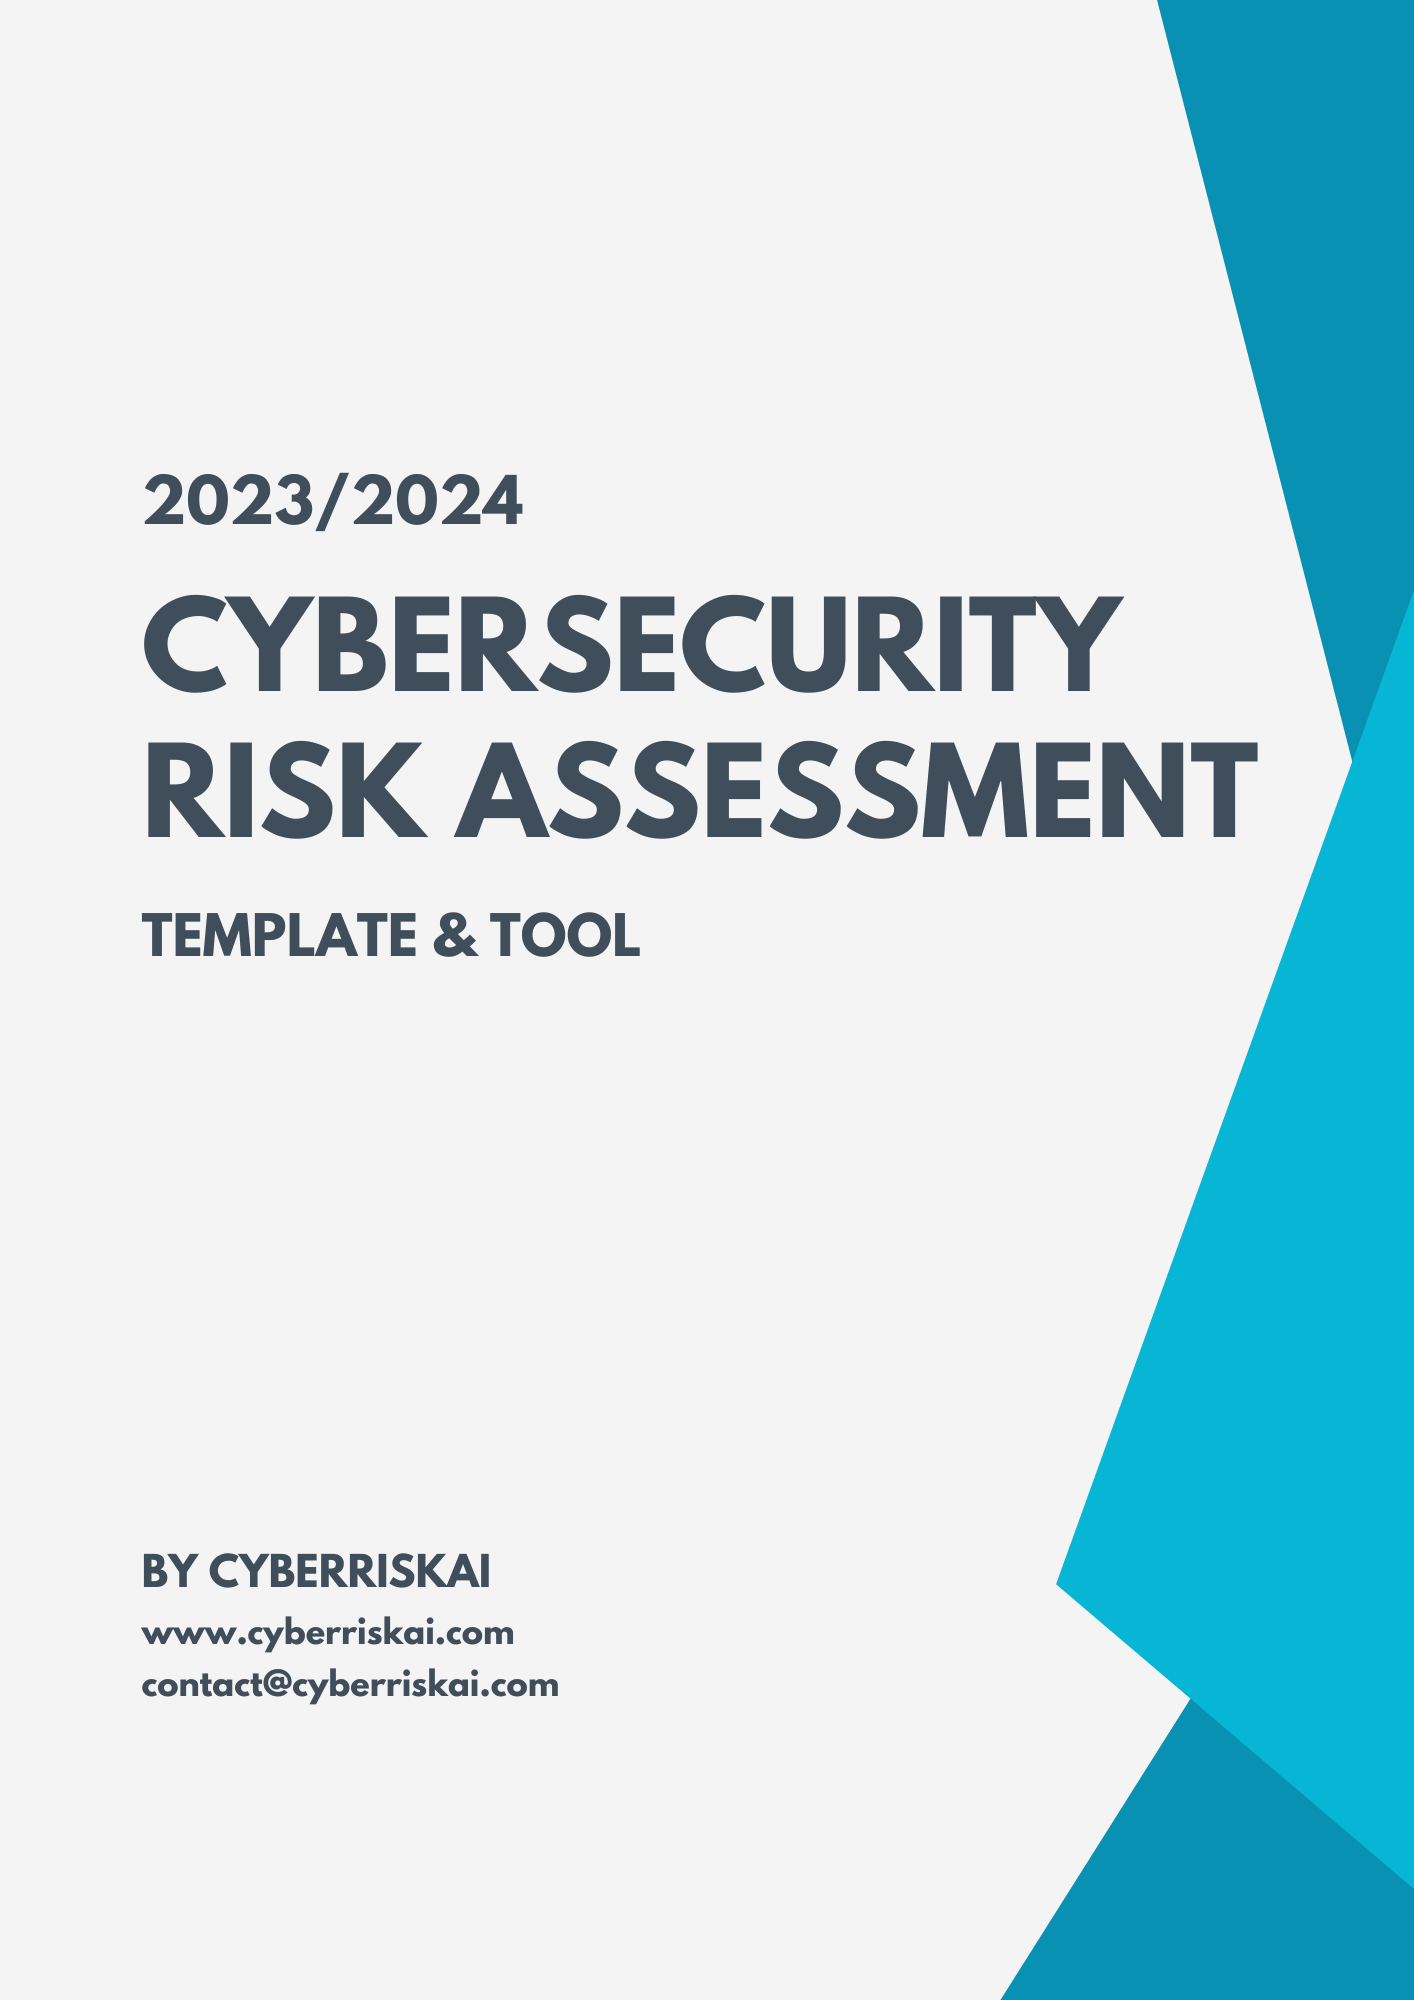 Cybersecurity Risk Assessment Tool Template